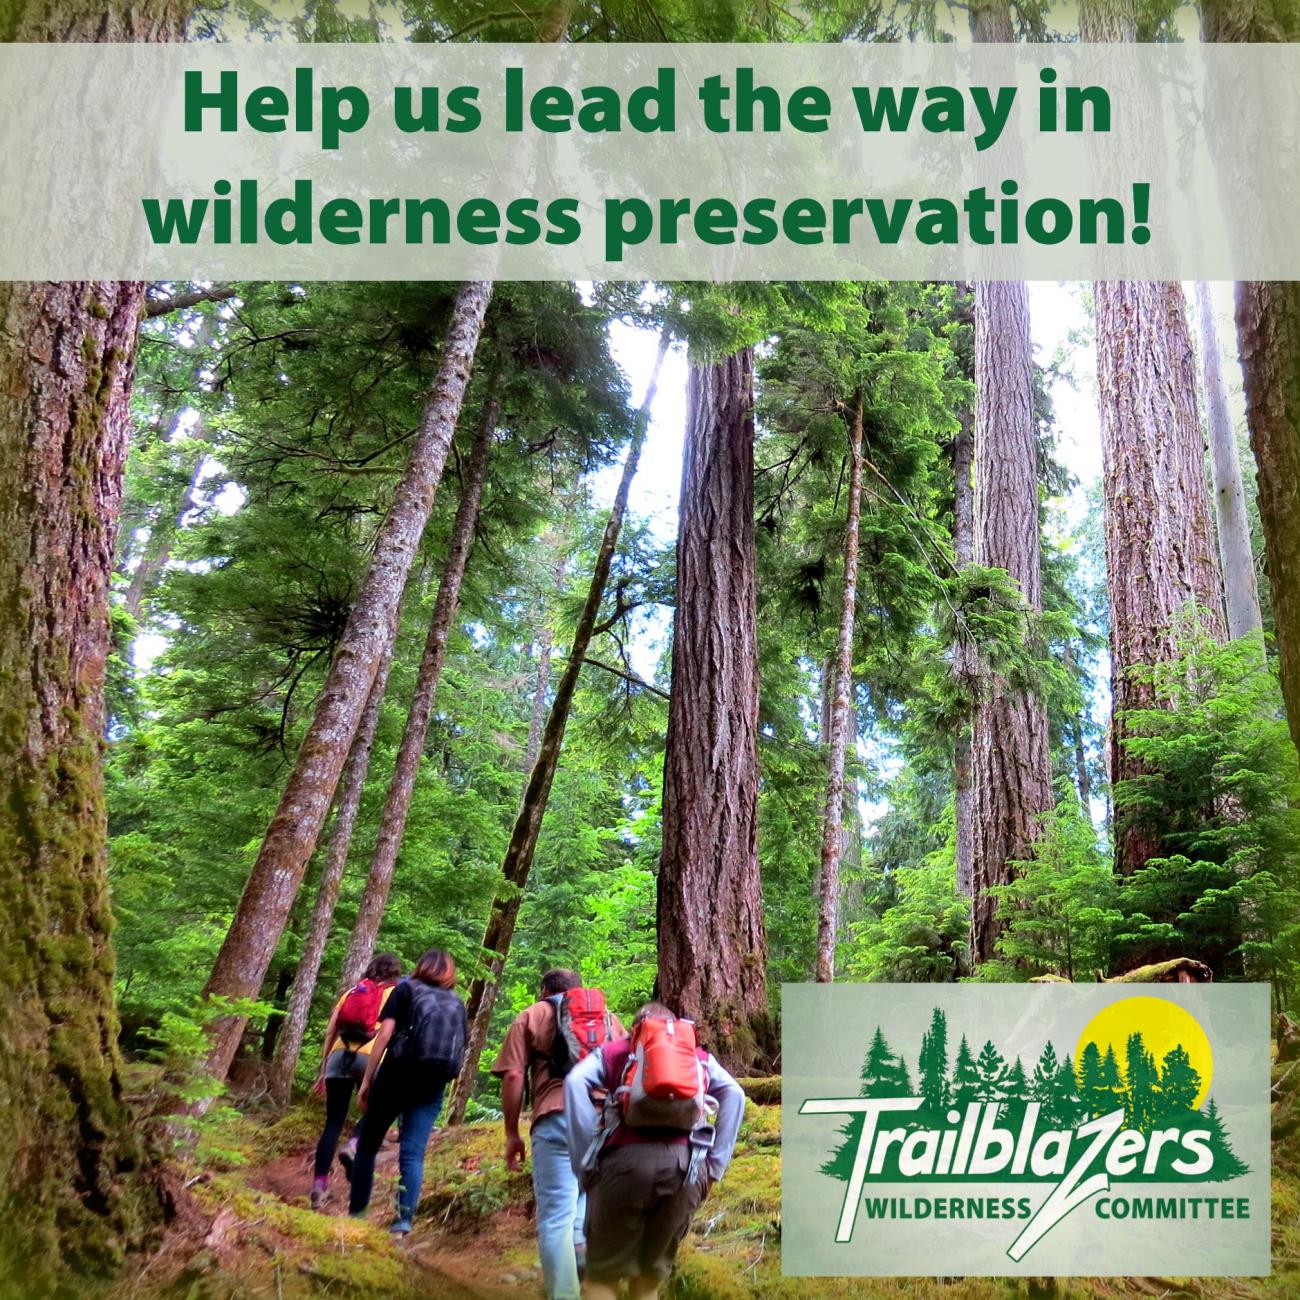 Volunteers hiking up a forest trail, with the text "Help us lead the way in wilderness preservation!" above